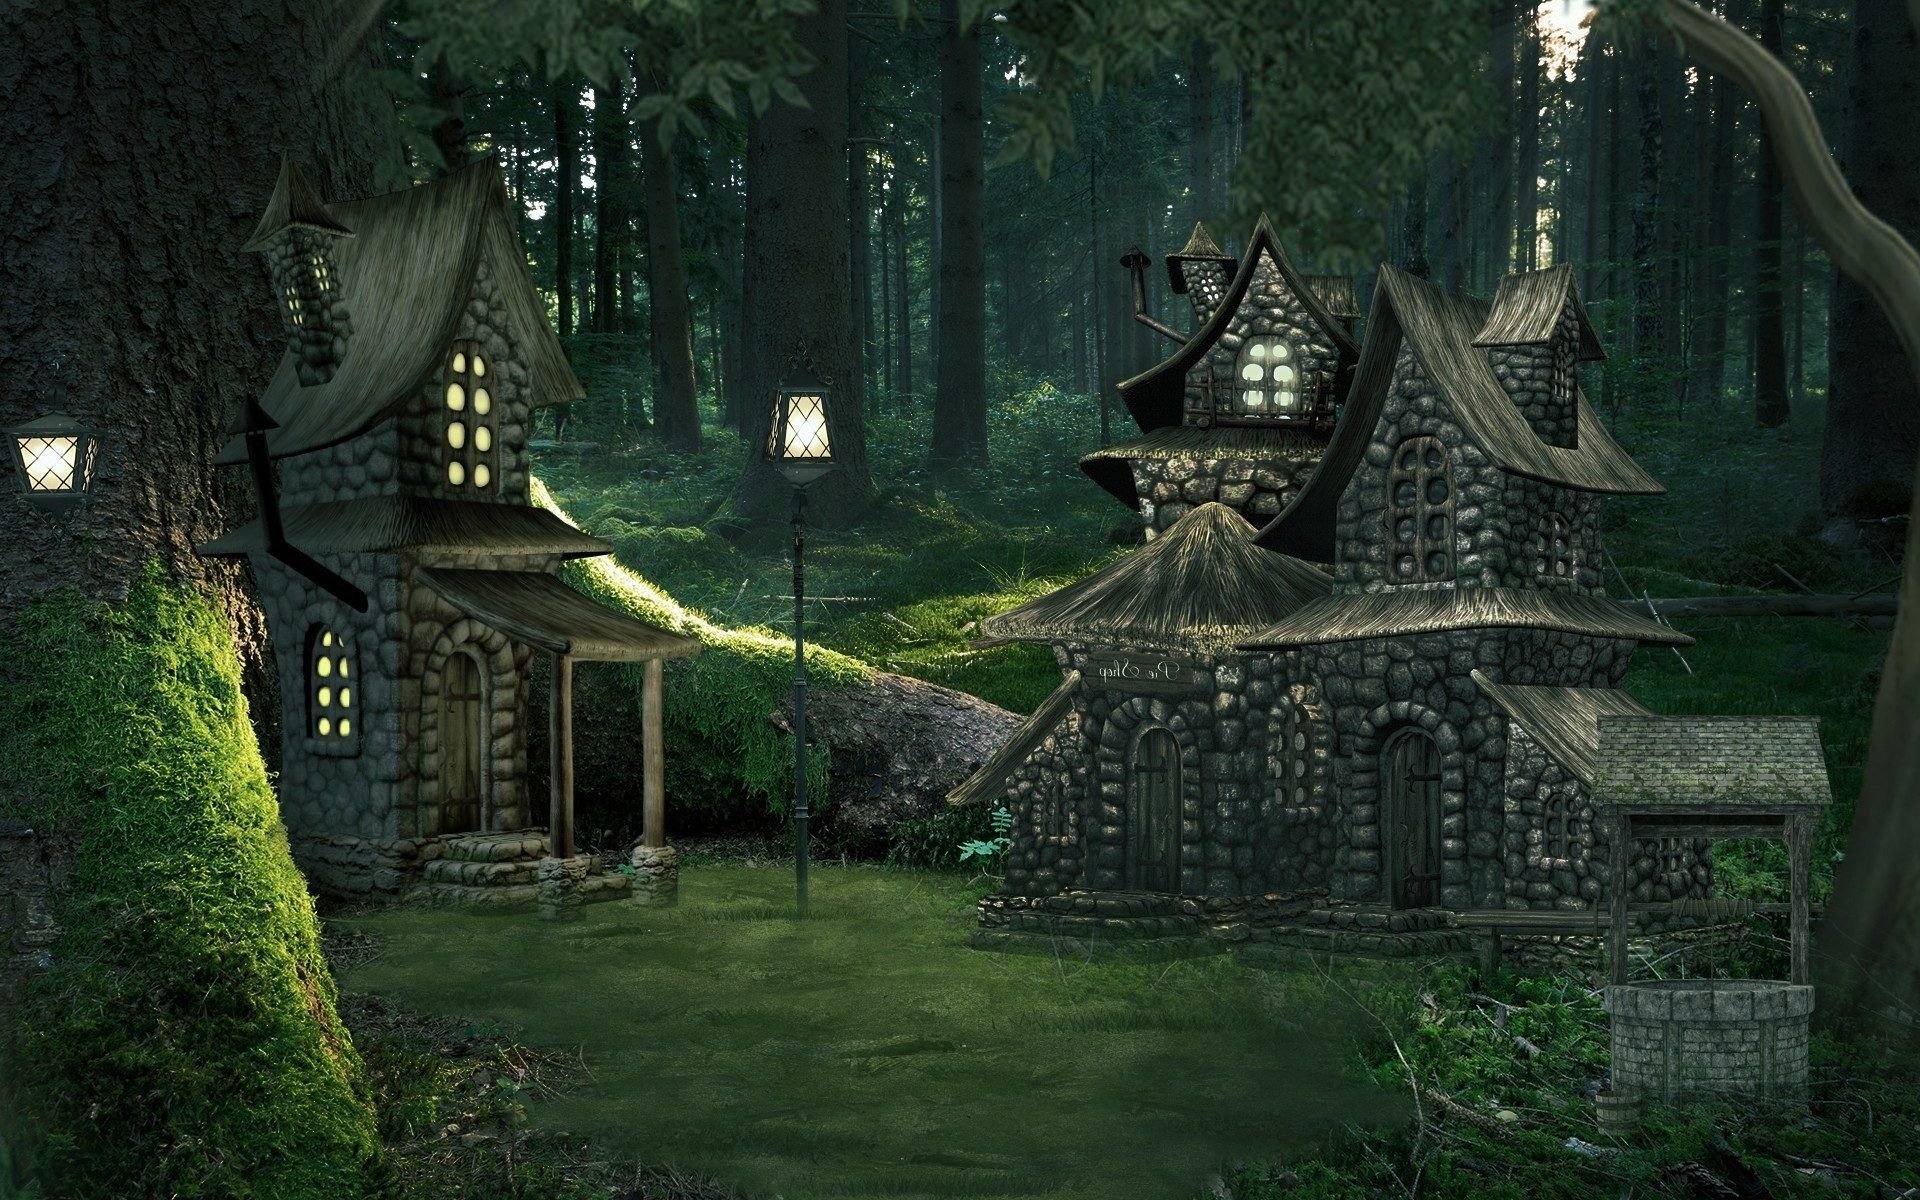 Enchanted Cottage Wallpapers - Wallpaper Cave